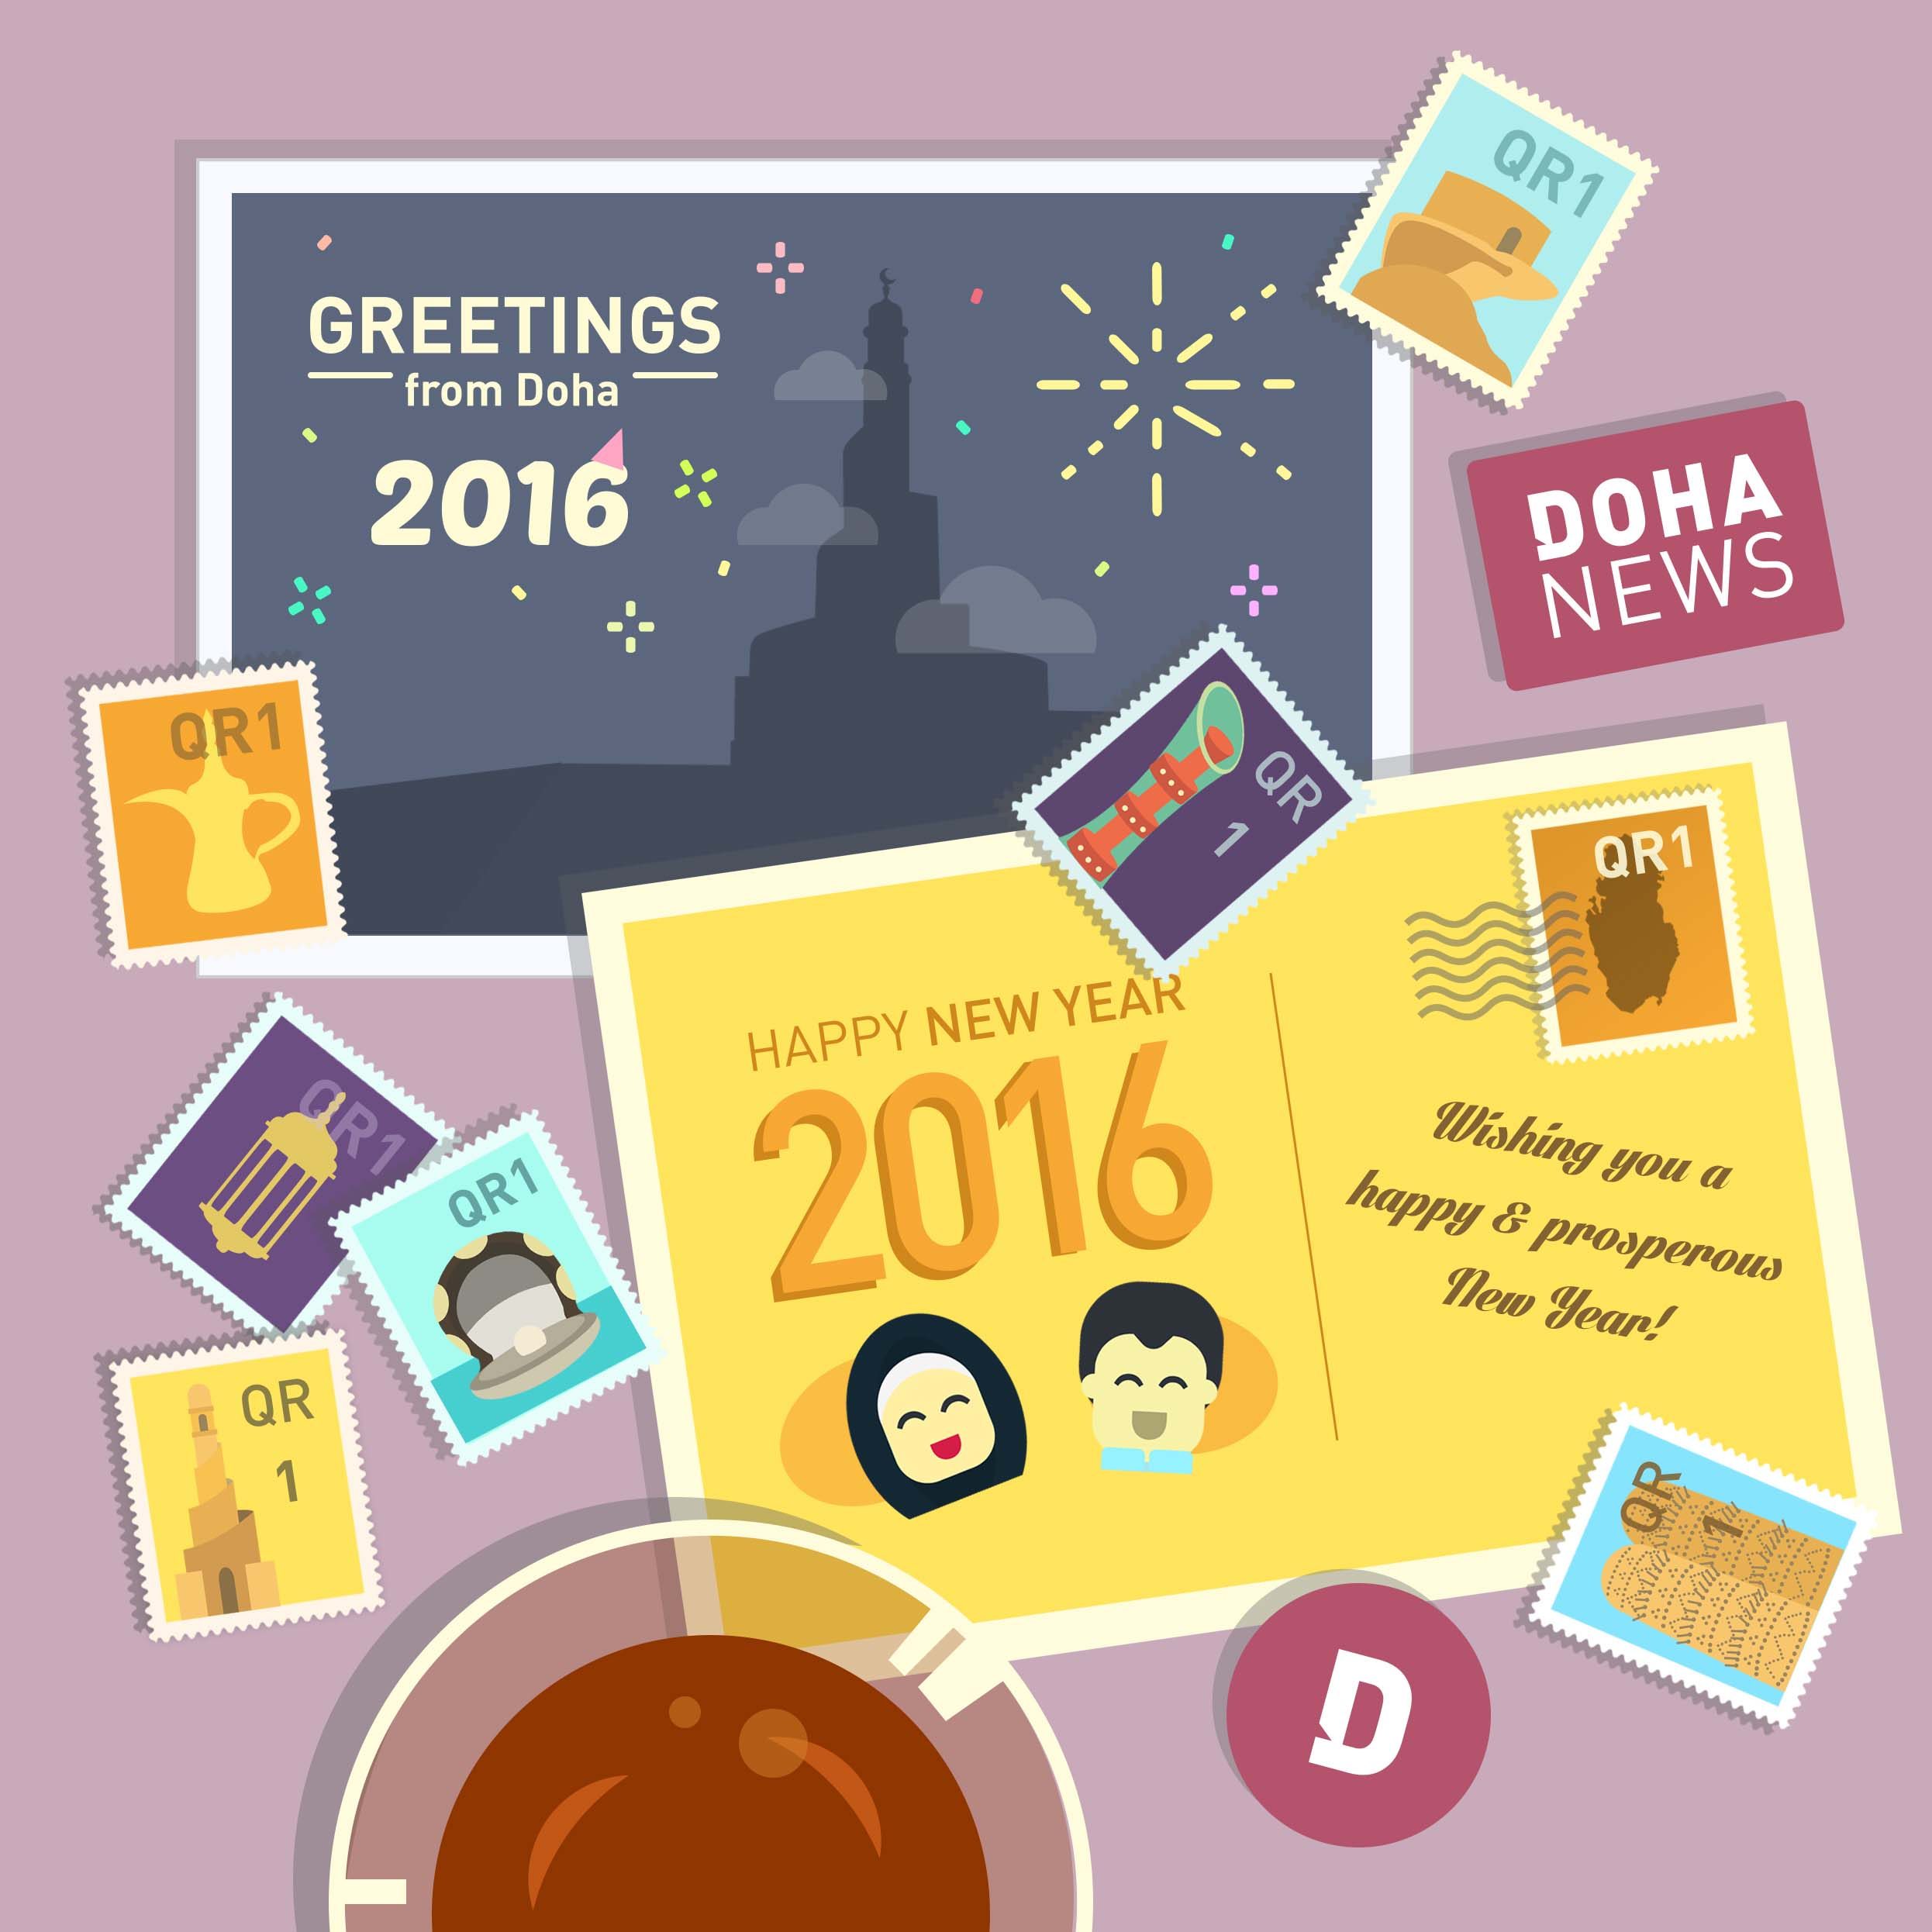 Best wishes in 2016